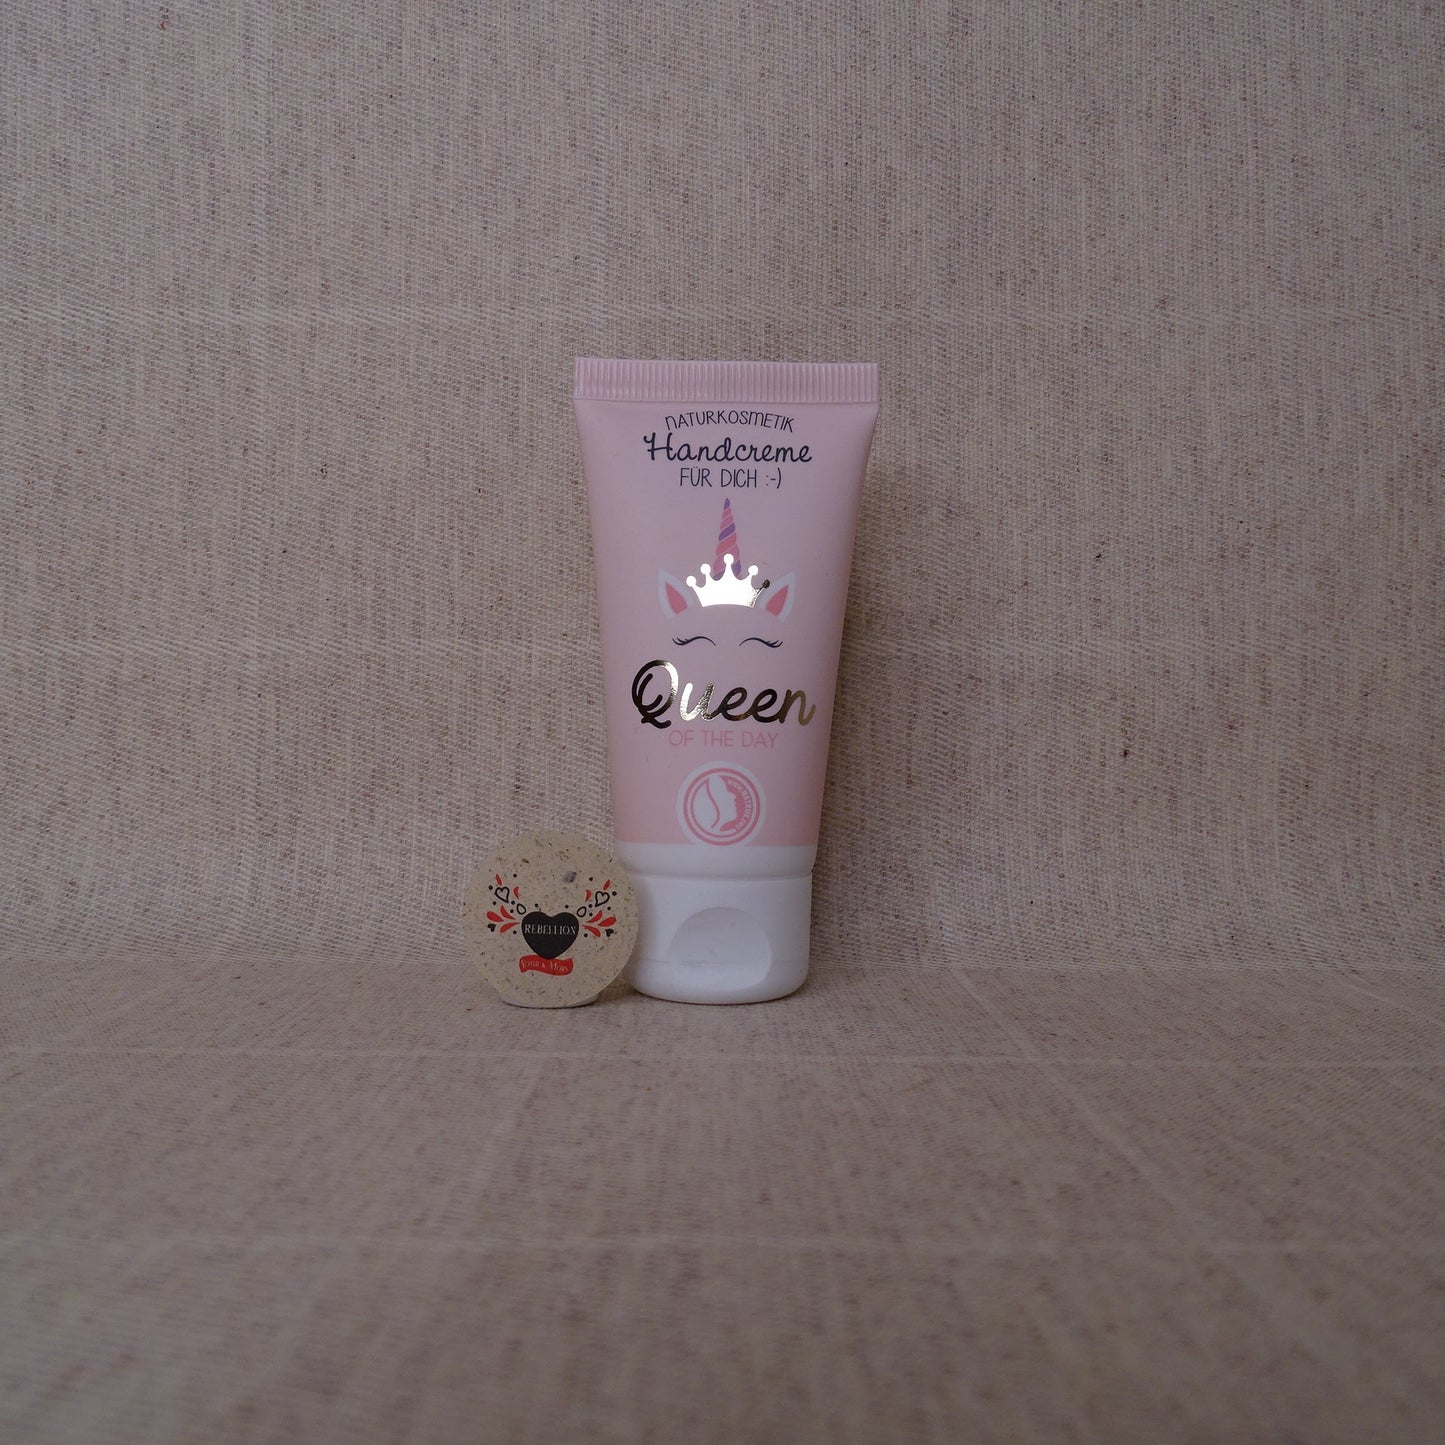 Handcreme mit Spruch "Queen of the day"